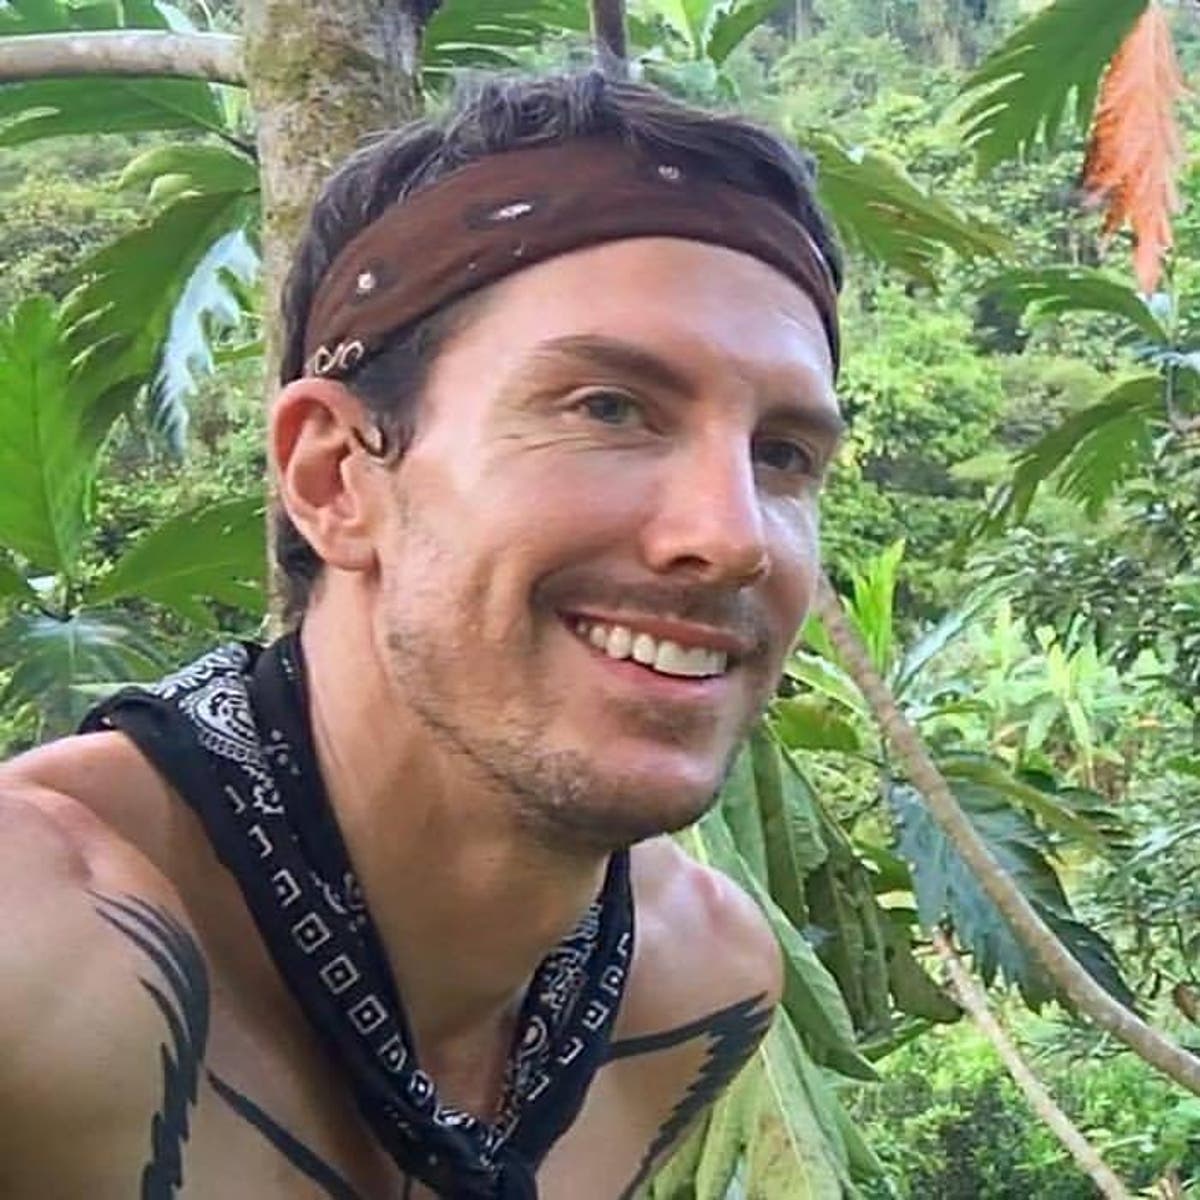 Family searches for answers after survivalist disappeared in ‘valley of death’